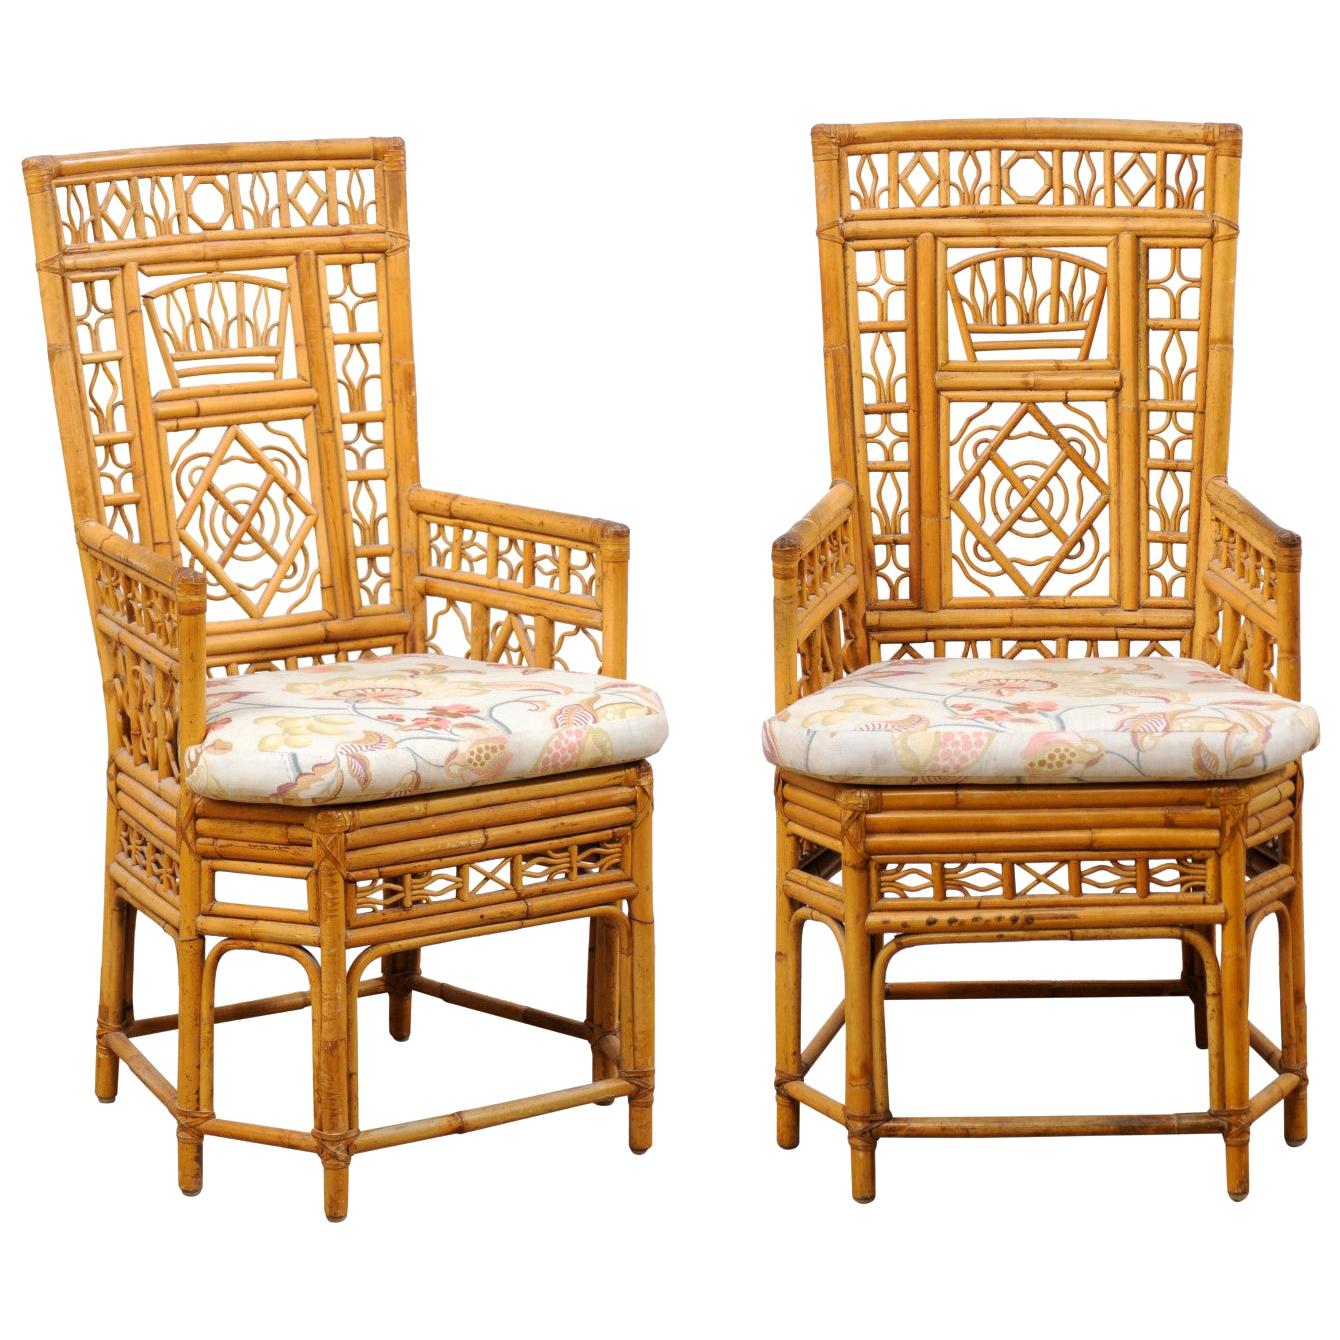 Pair of Ornately Designed Bamboo Occasional High-Back Armchairs